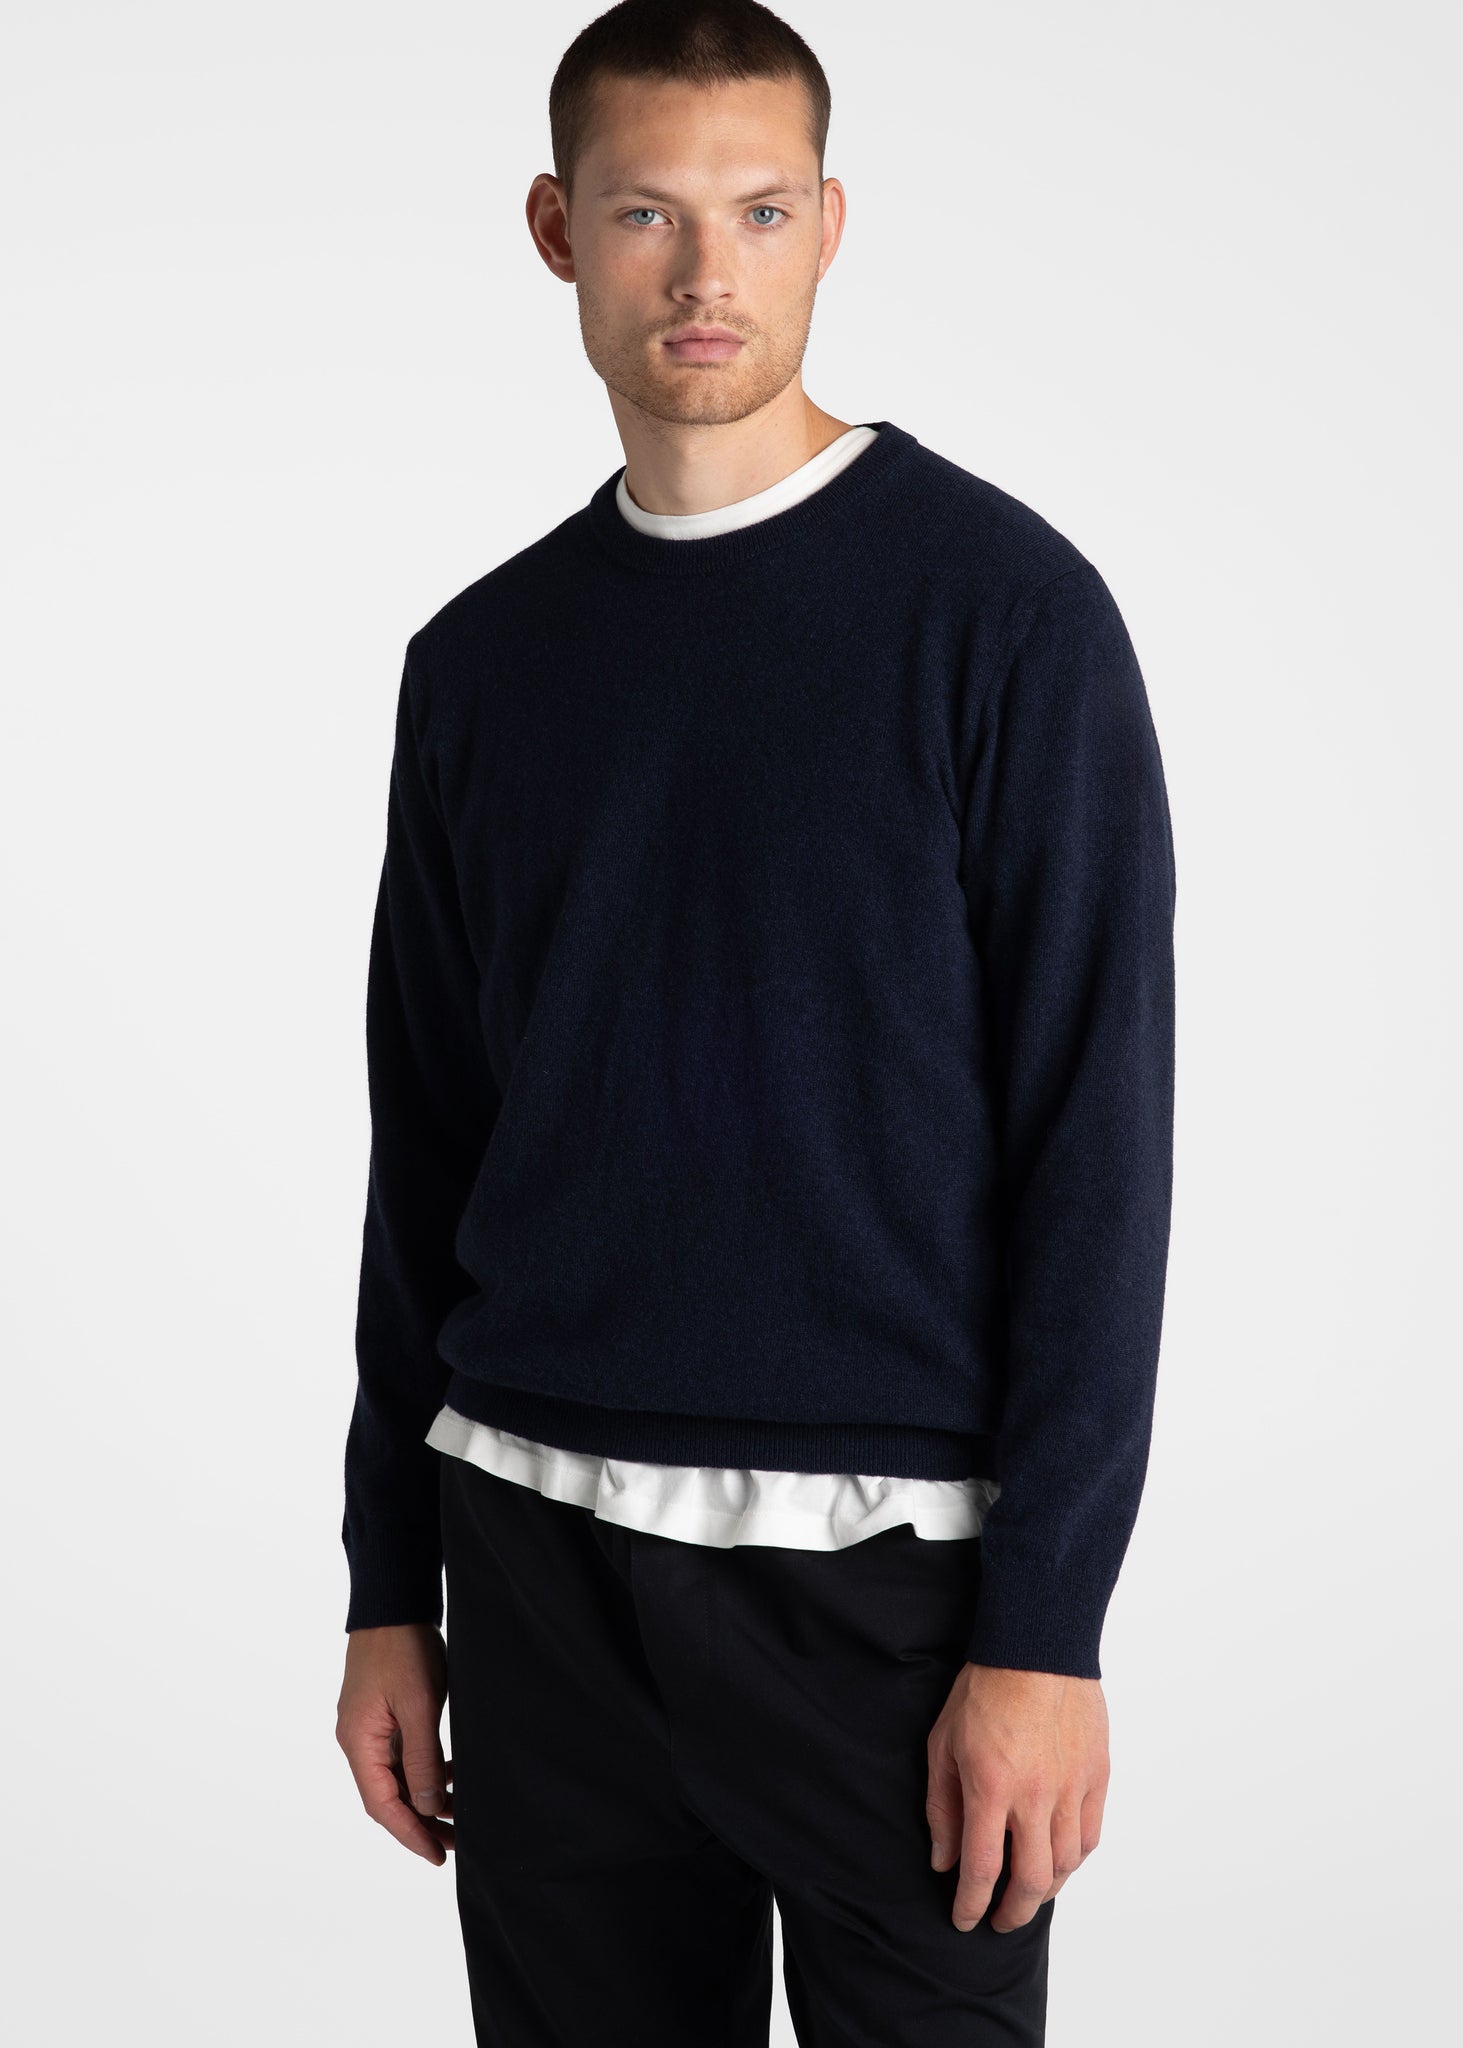 Lambswool Sweater Navy - Final Sale – UNRECORDED